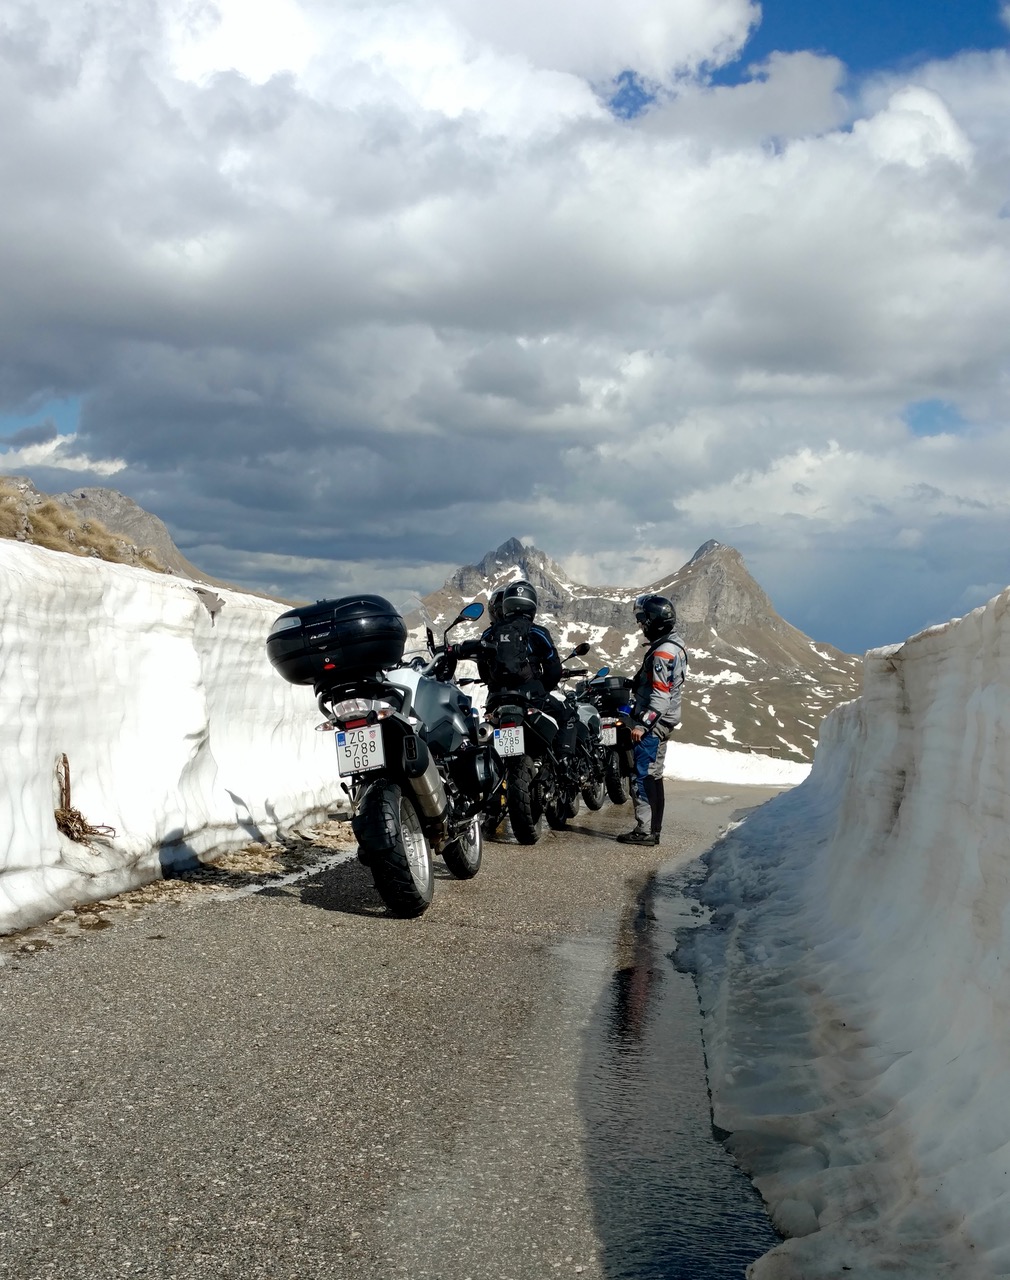 Riding the Balkans, and the occasional snow chute